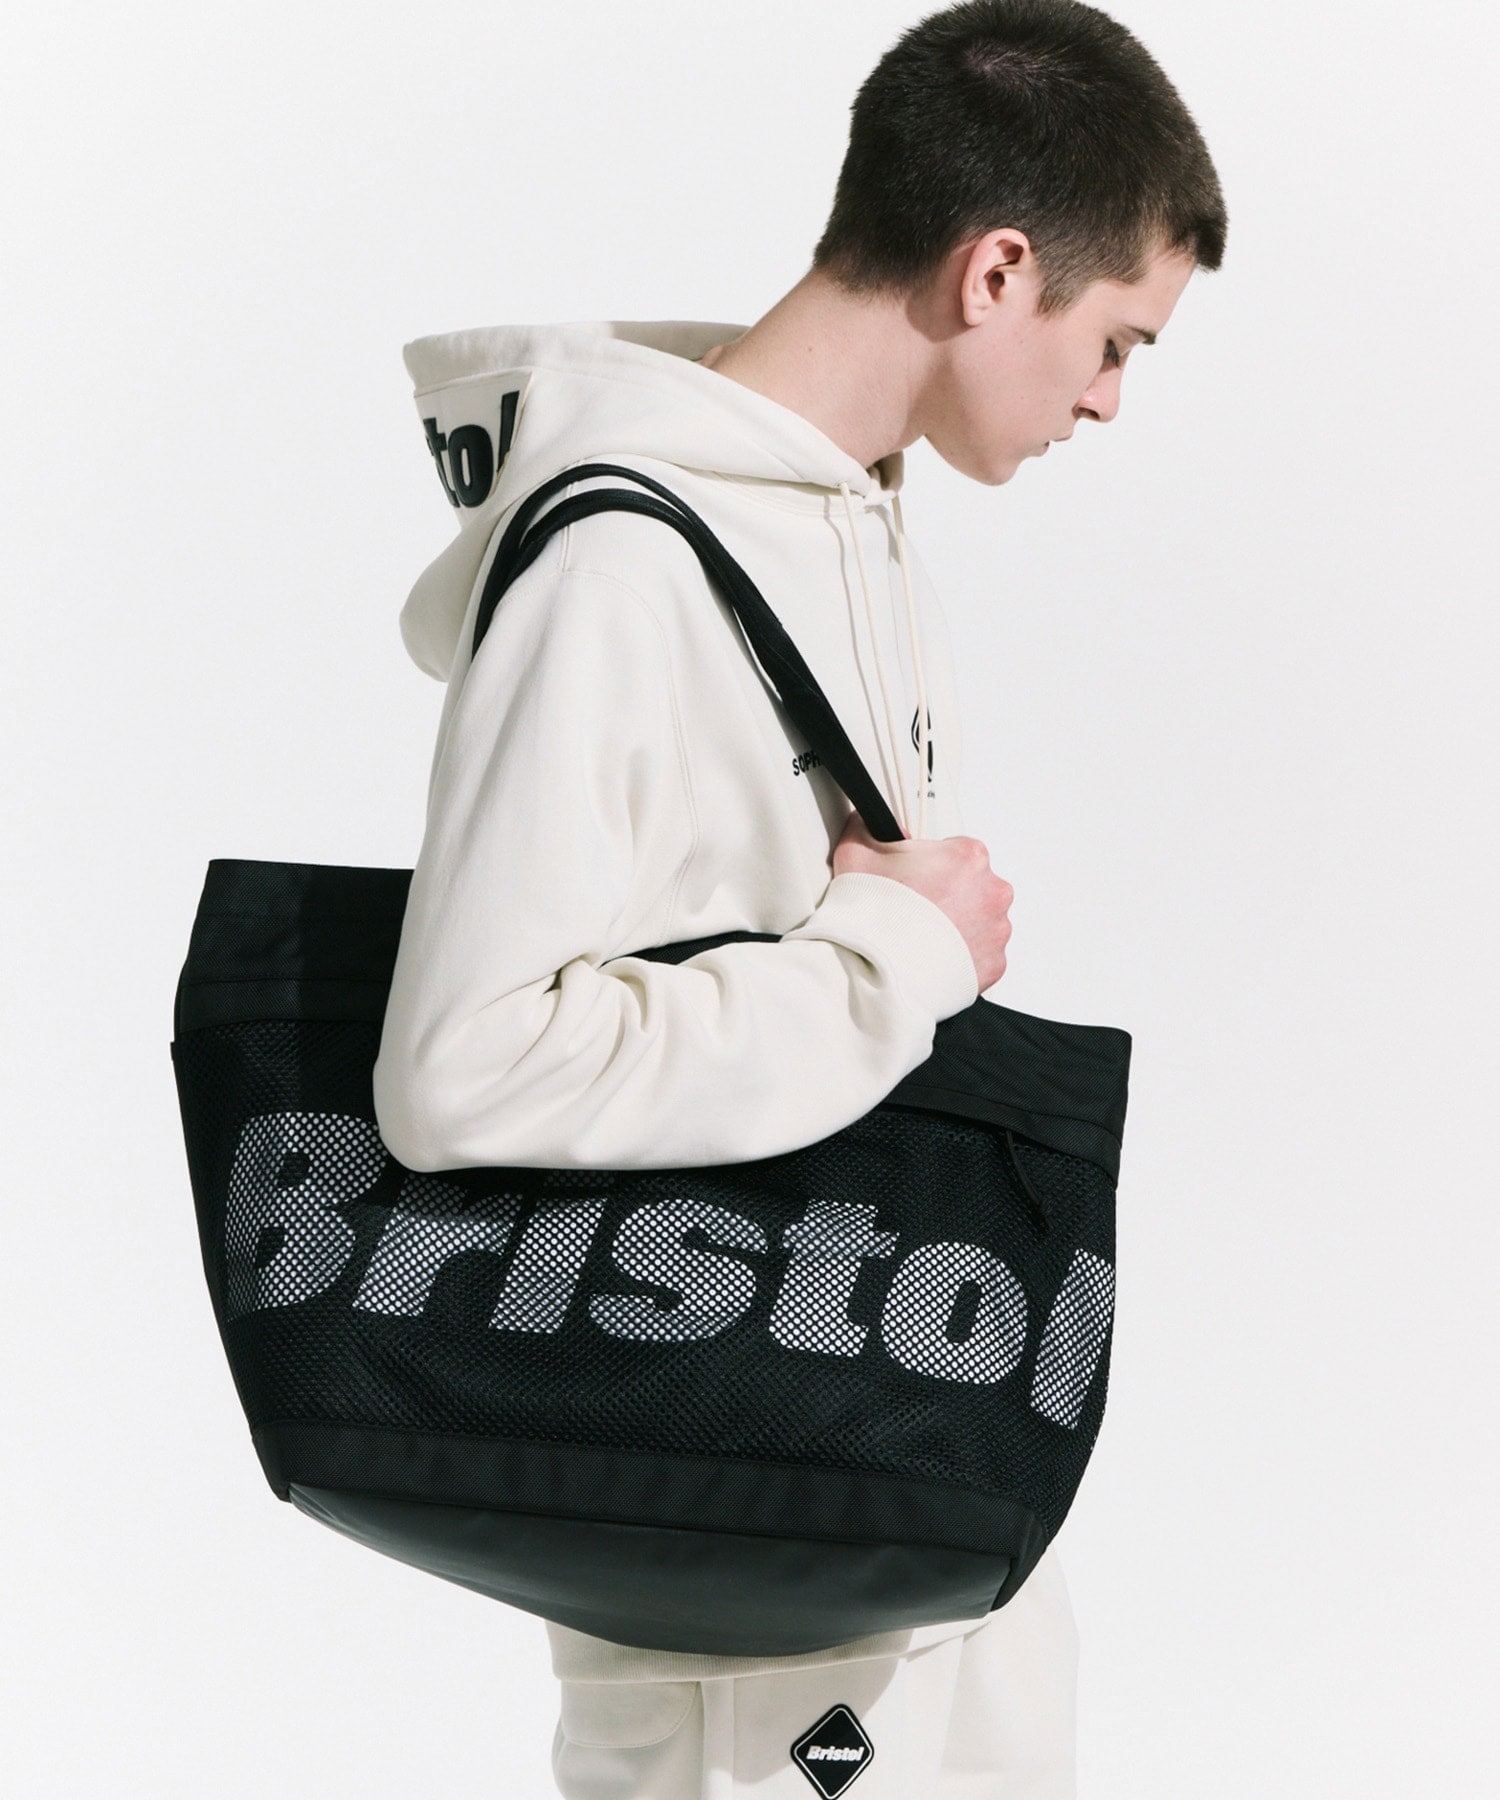 FCRB 22ss SMALL TOTE BAG BLACK 未使用新品 F.C.Real Bristol ...